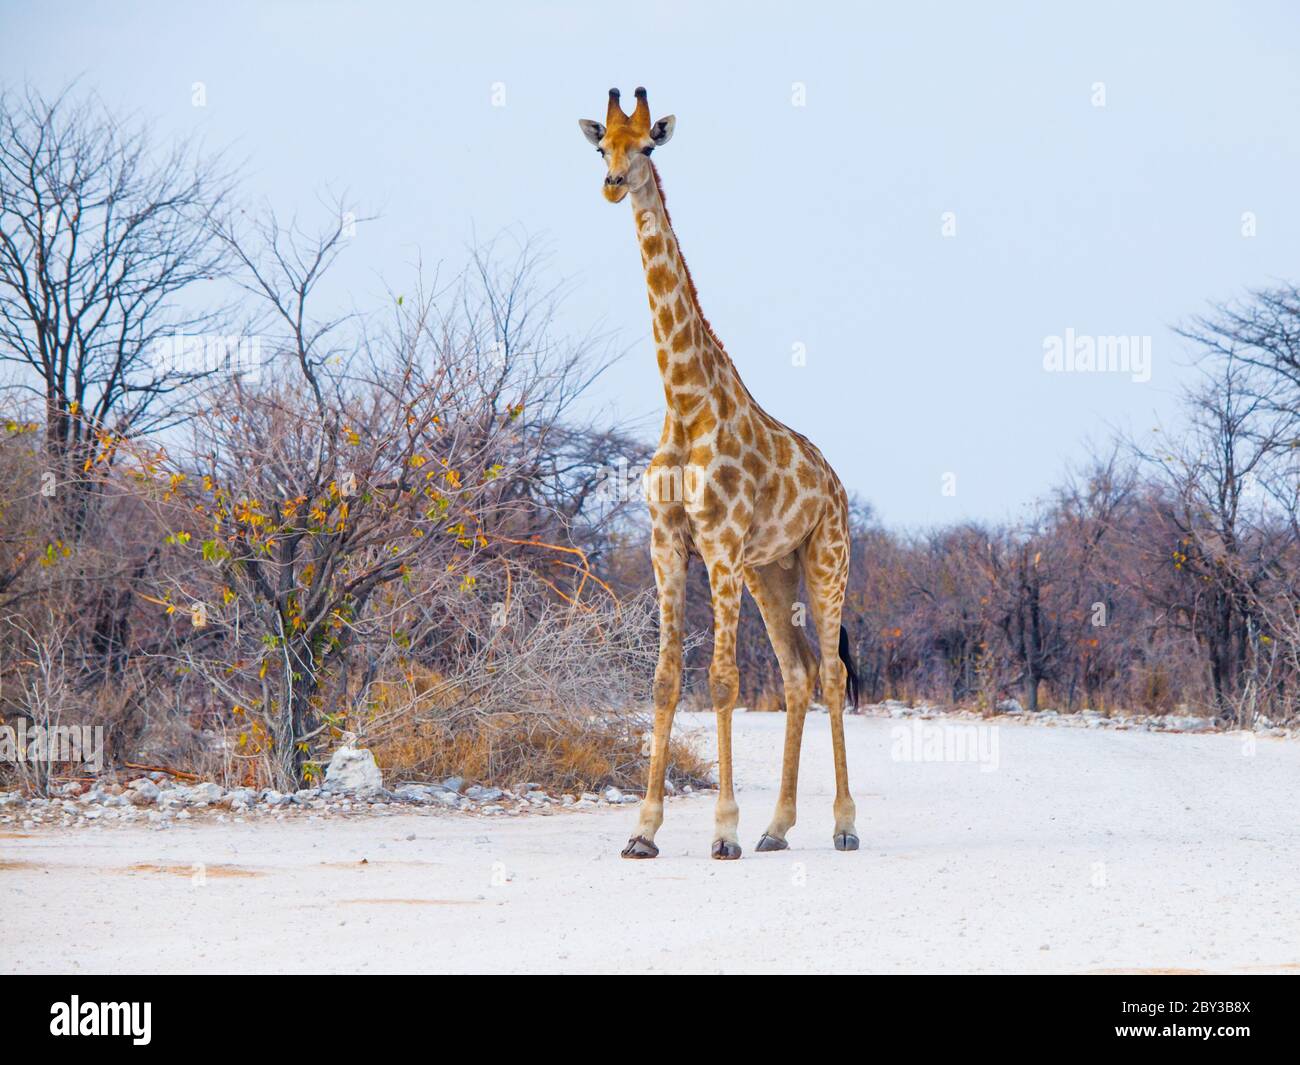 Young giraffe standing on the dusty road, Etosha National Park, Namibia Stock Photo